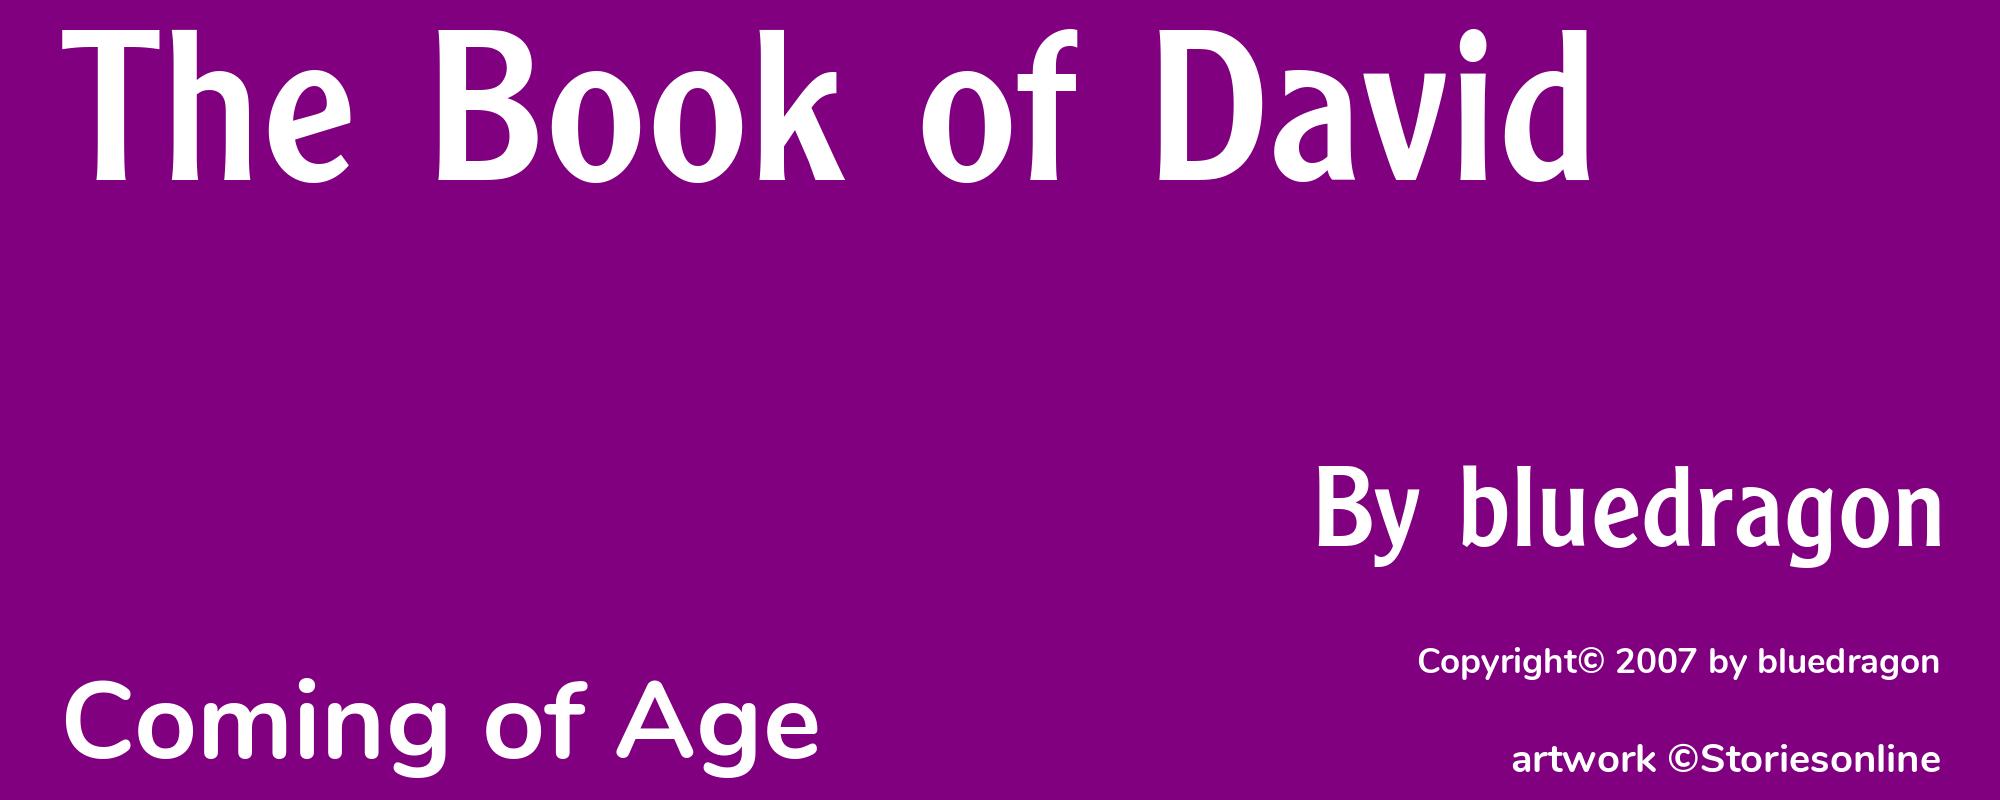 The Book of David - Cover